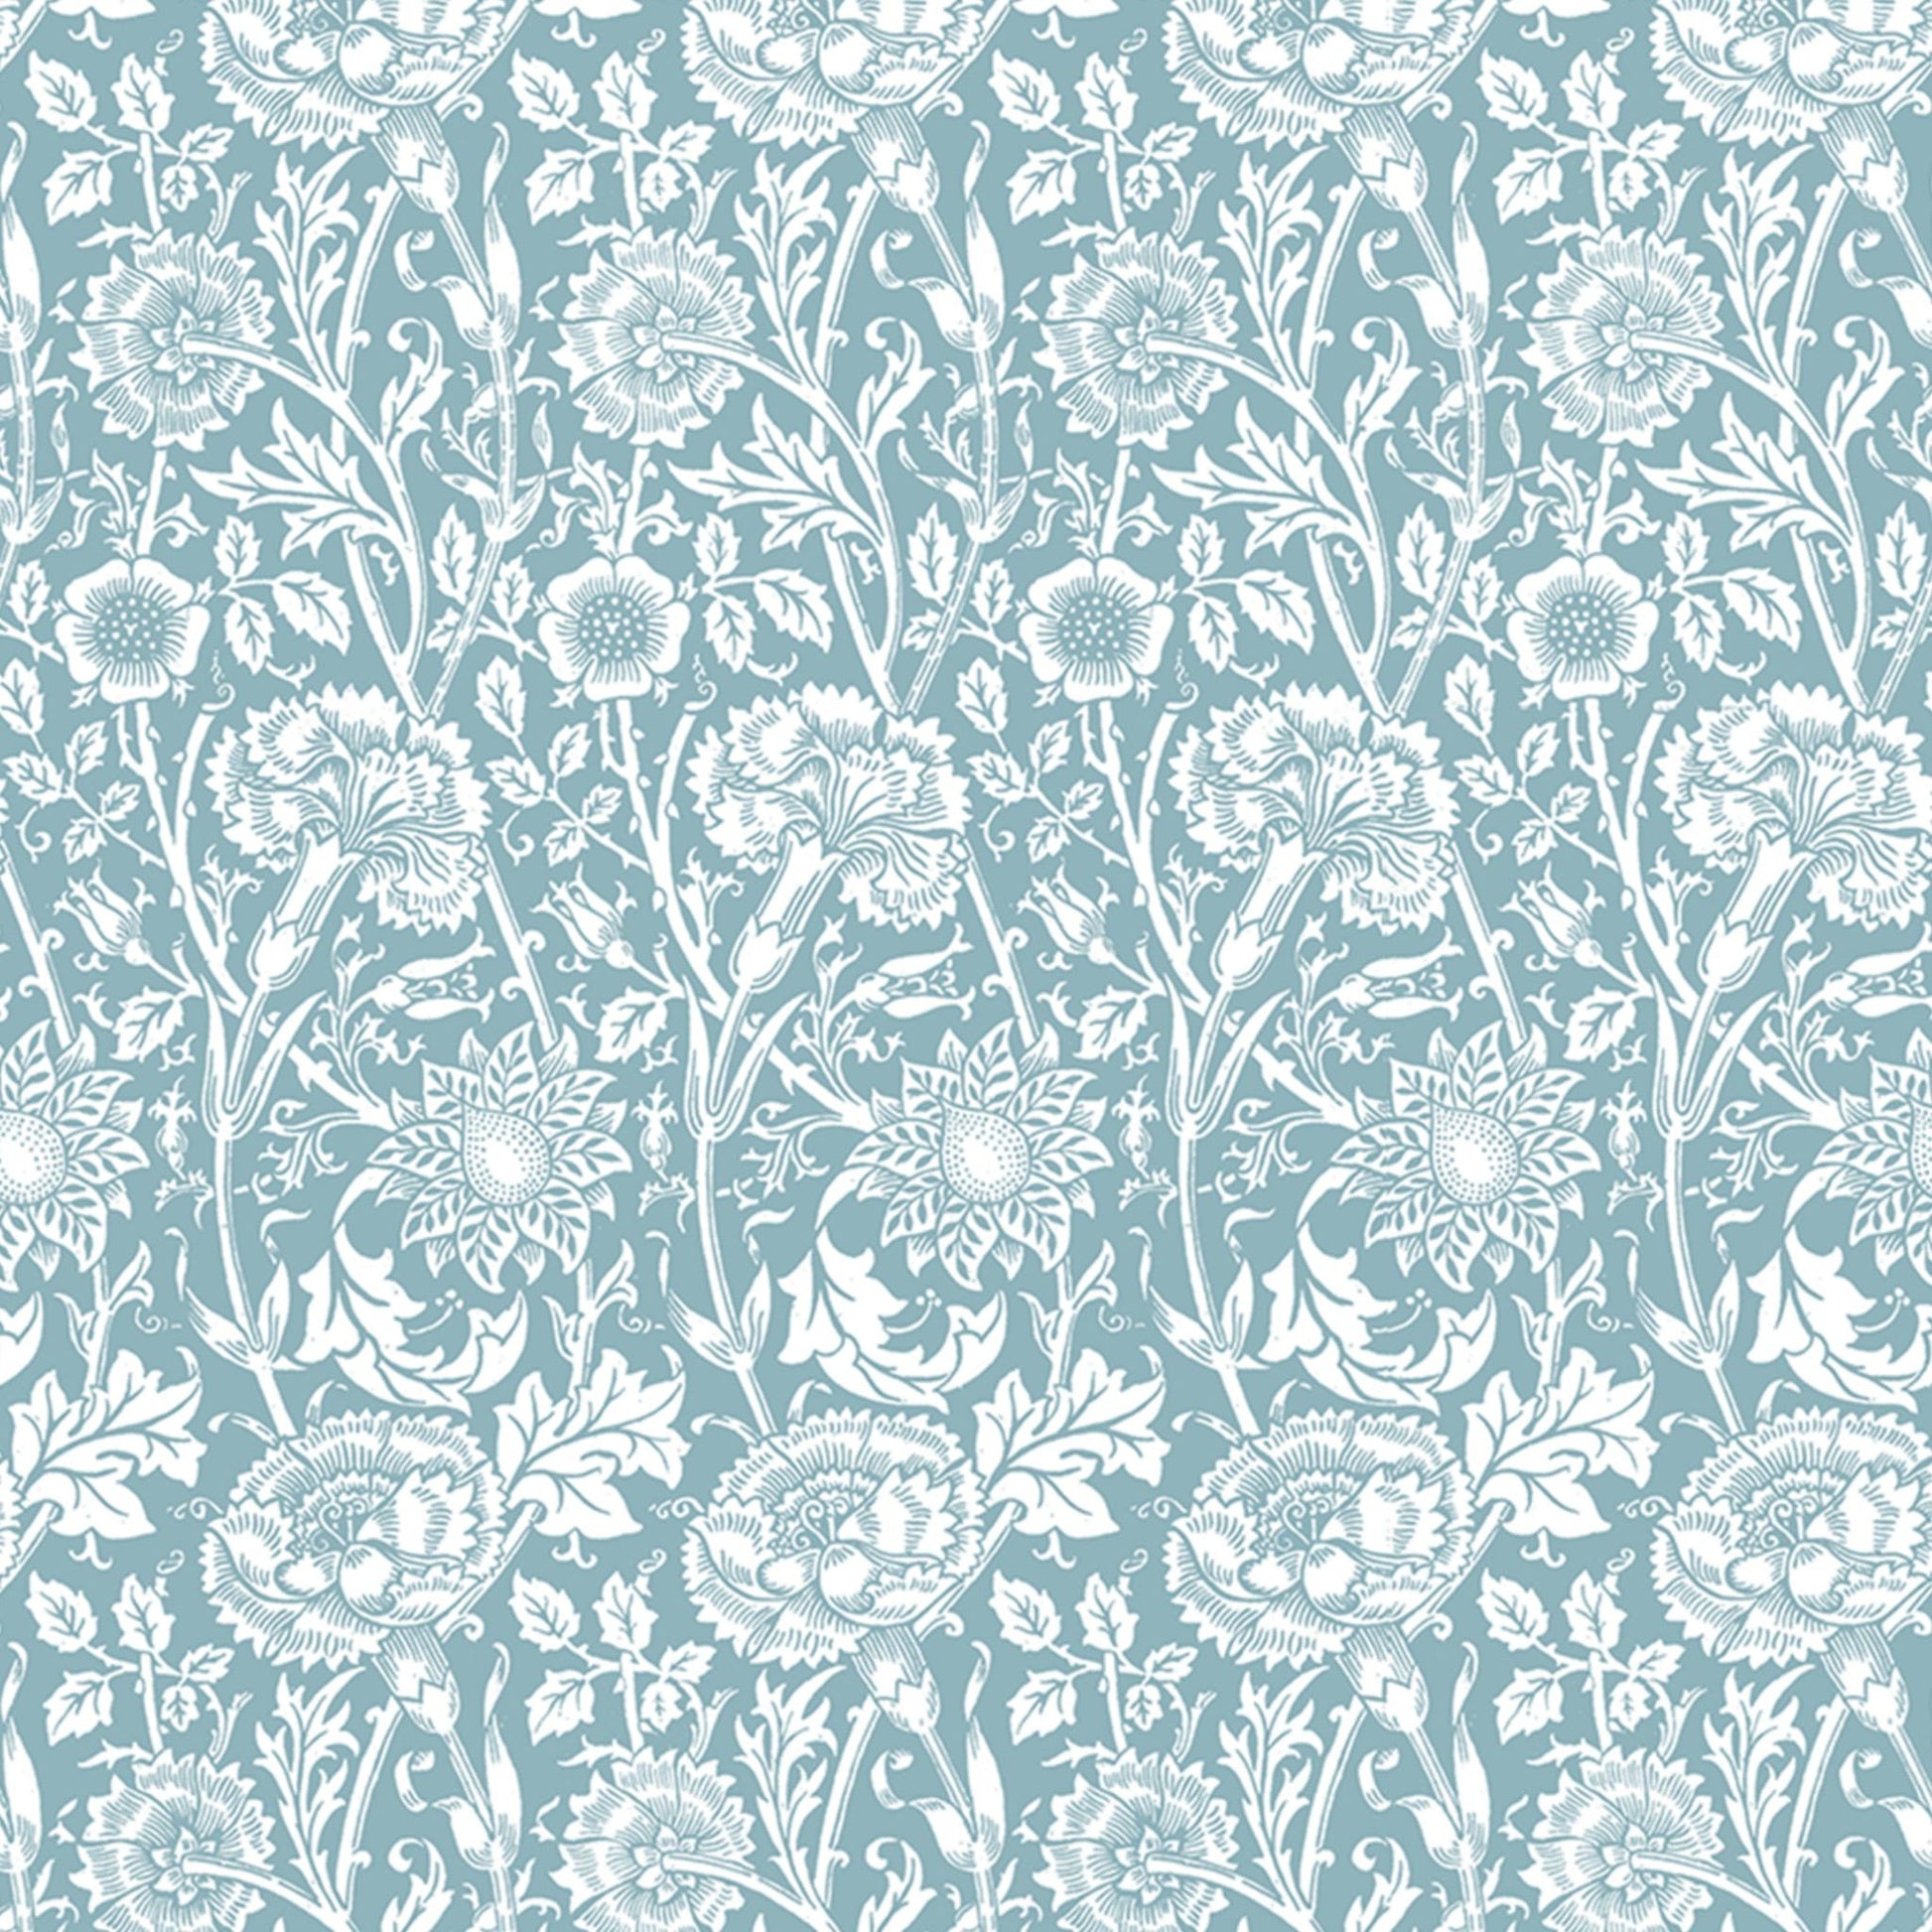 THE MASTER HERBALIST ROSE fragrance SCENTED Drawer Liners in DUCK EGG BLUE William Morris Design. Made in Britain.